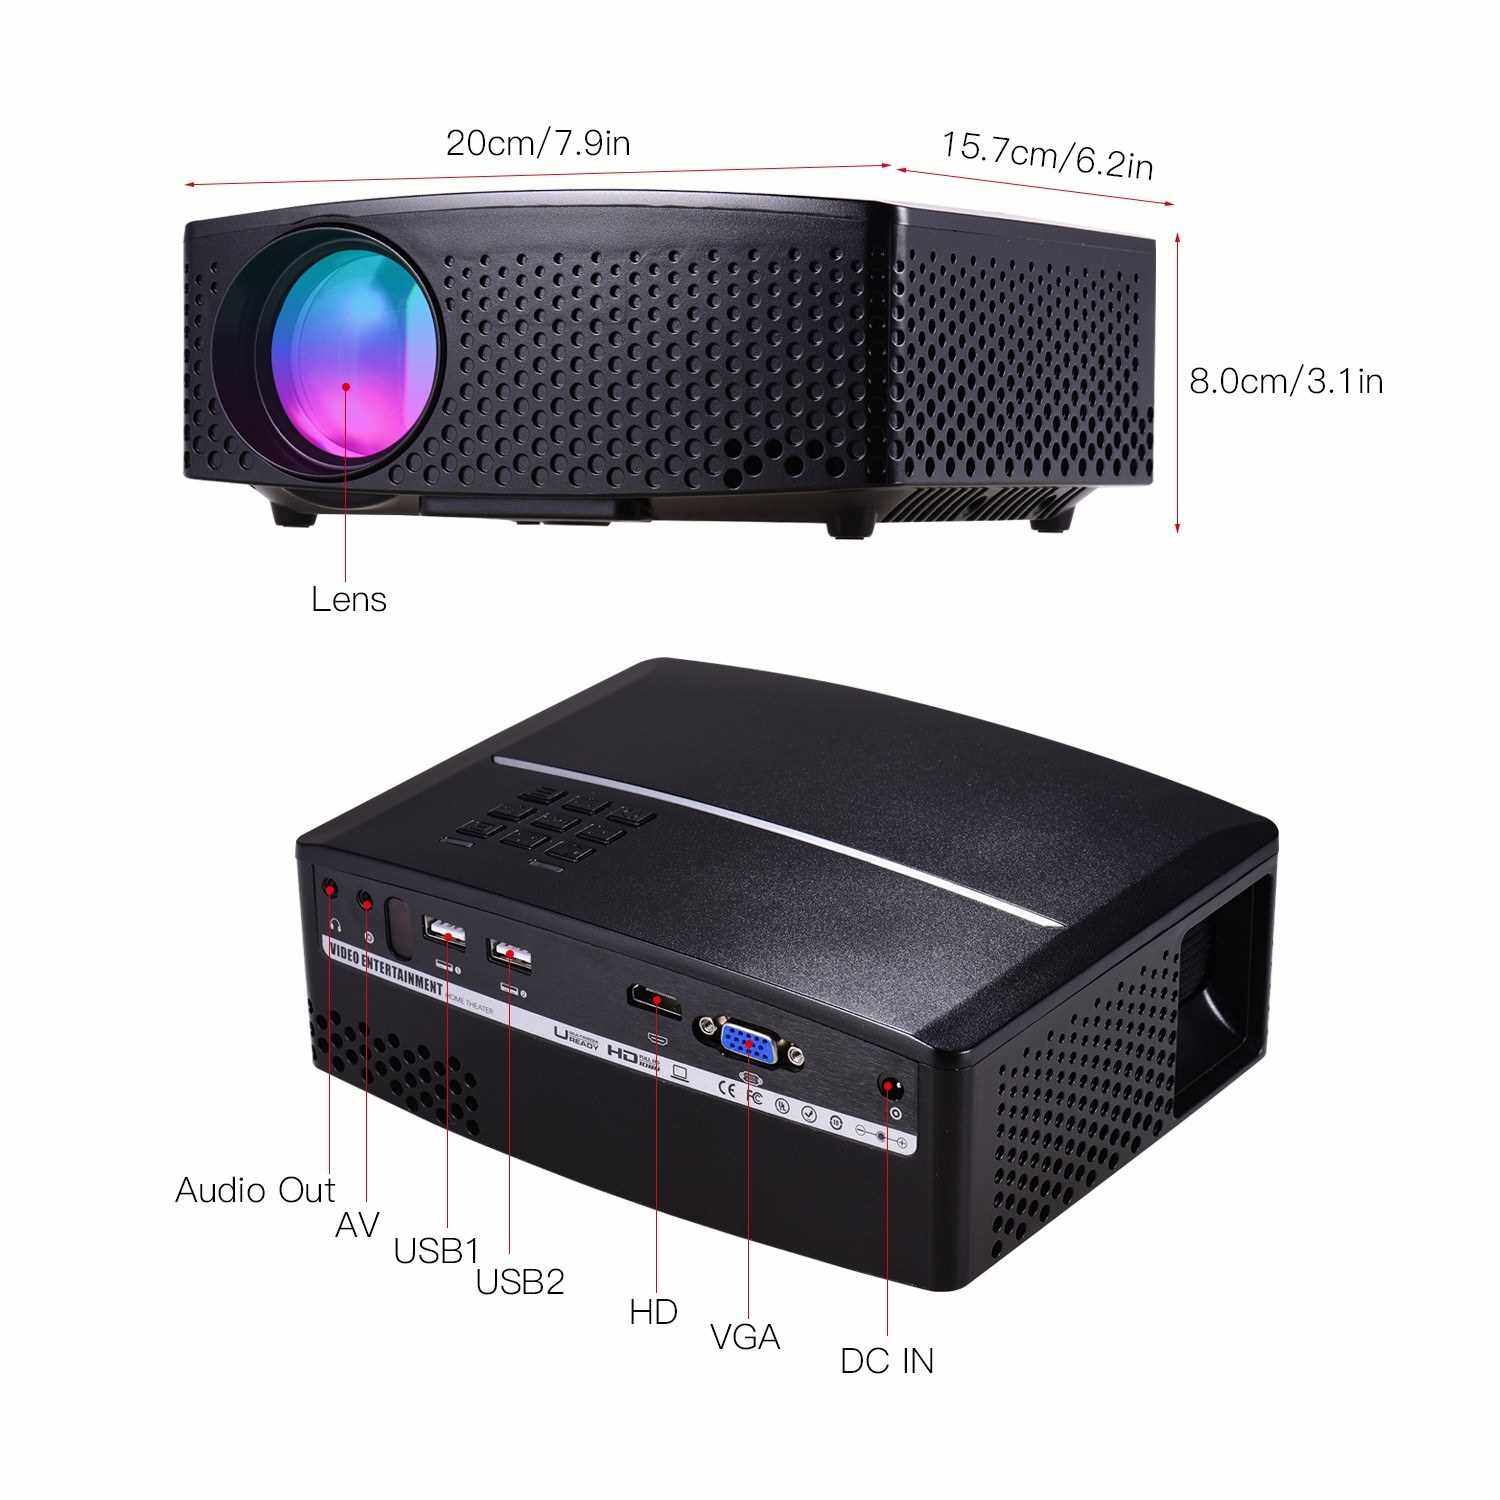 GP80 Mini LED Video Projector 1080P Supported 3500 Lumens 120 Inch Display Built-in Stereo Speaker with AV/USB/HD/VGA Interface Portable Movie Projector for Home Theater Entertainment (Black)